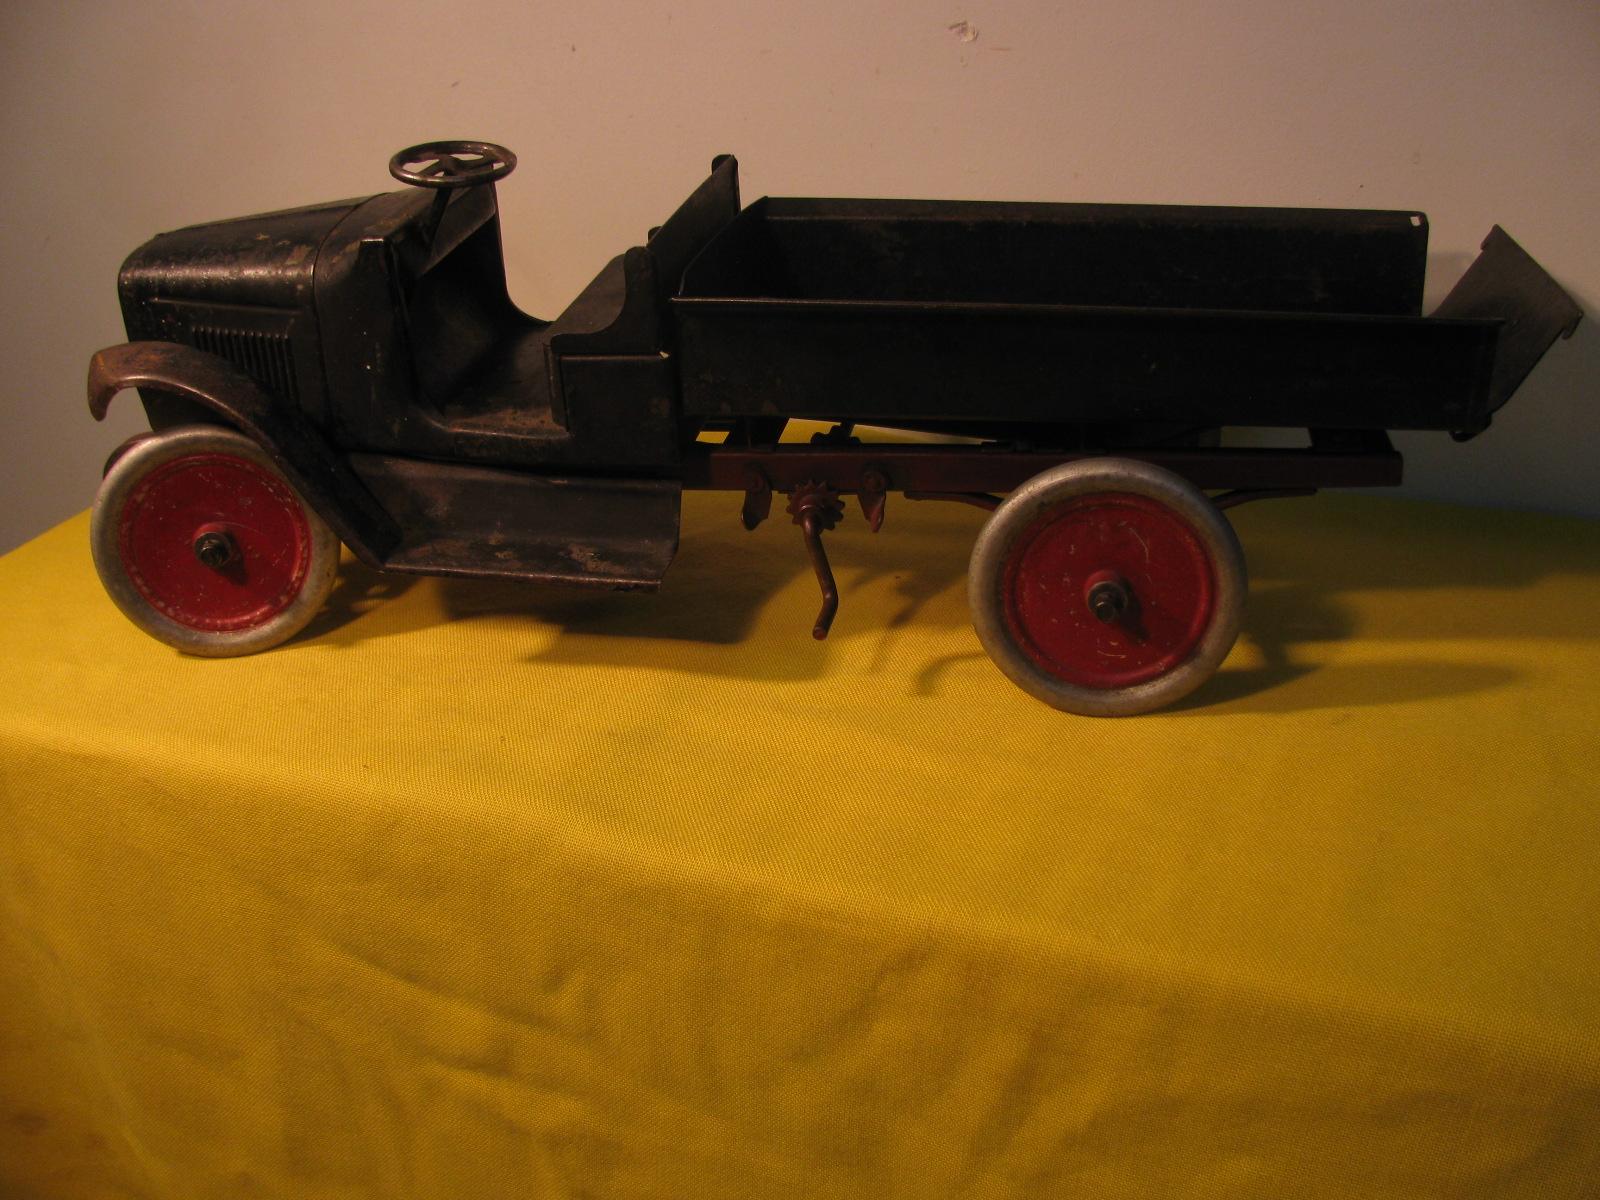 Piece of American History on 4 wheels. Buddy L trucks was the premiere pressed steel toy truck maker back in the day. This open air driver is structurally sound but missing half of a fender and the chain mechanism that would open and lower the dump